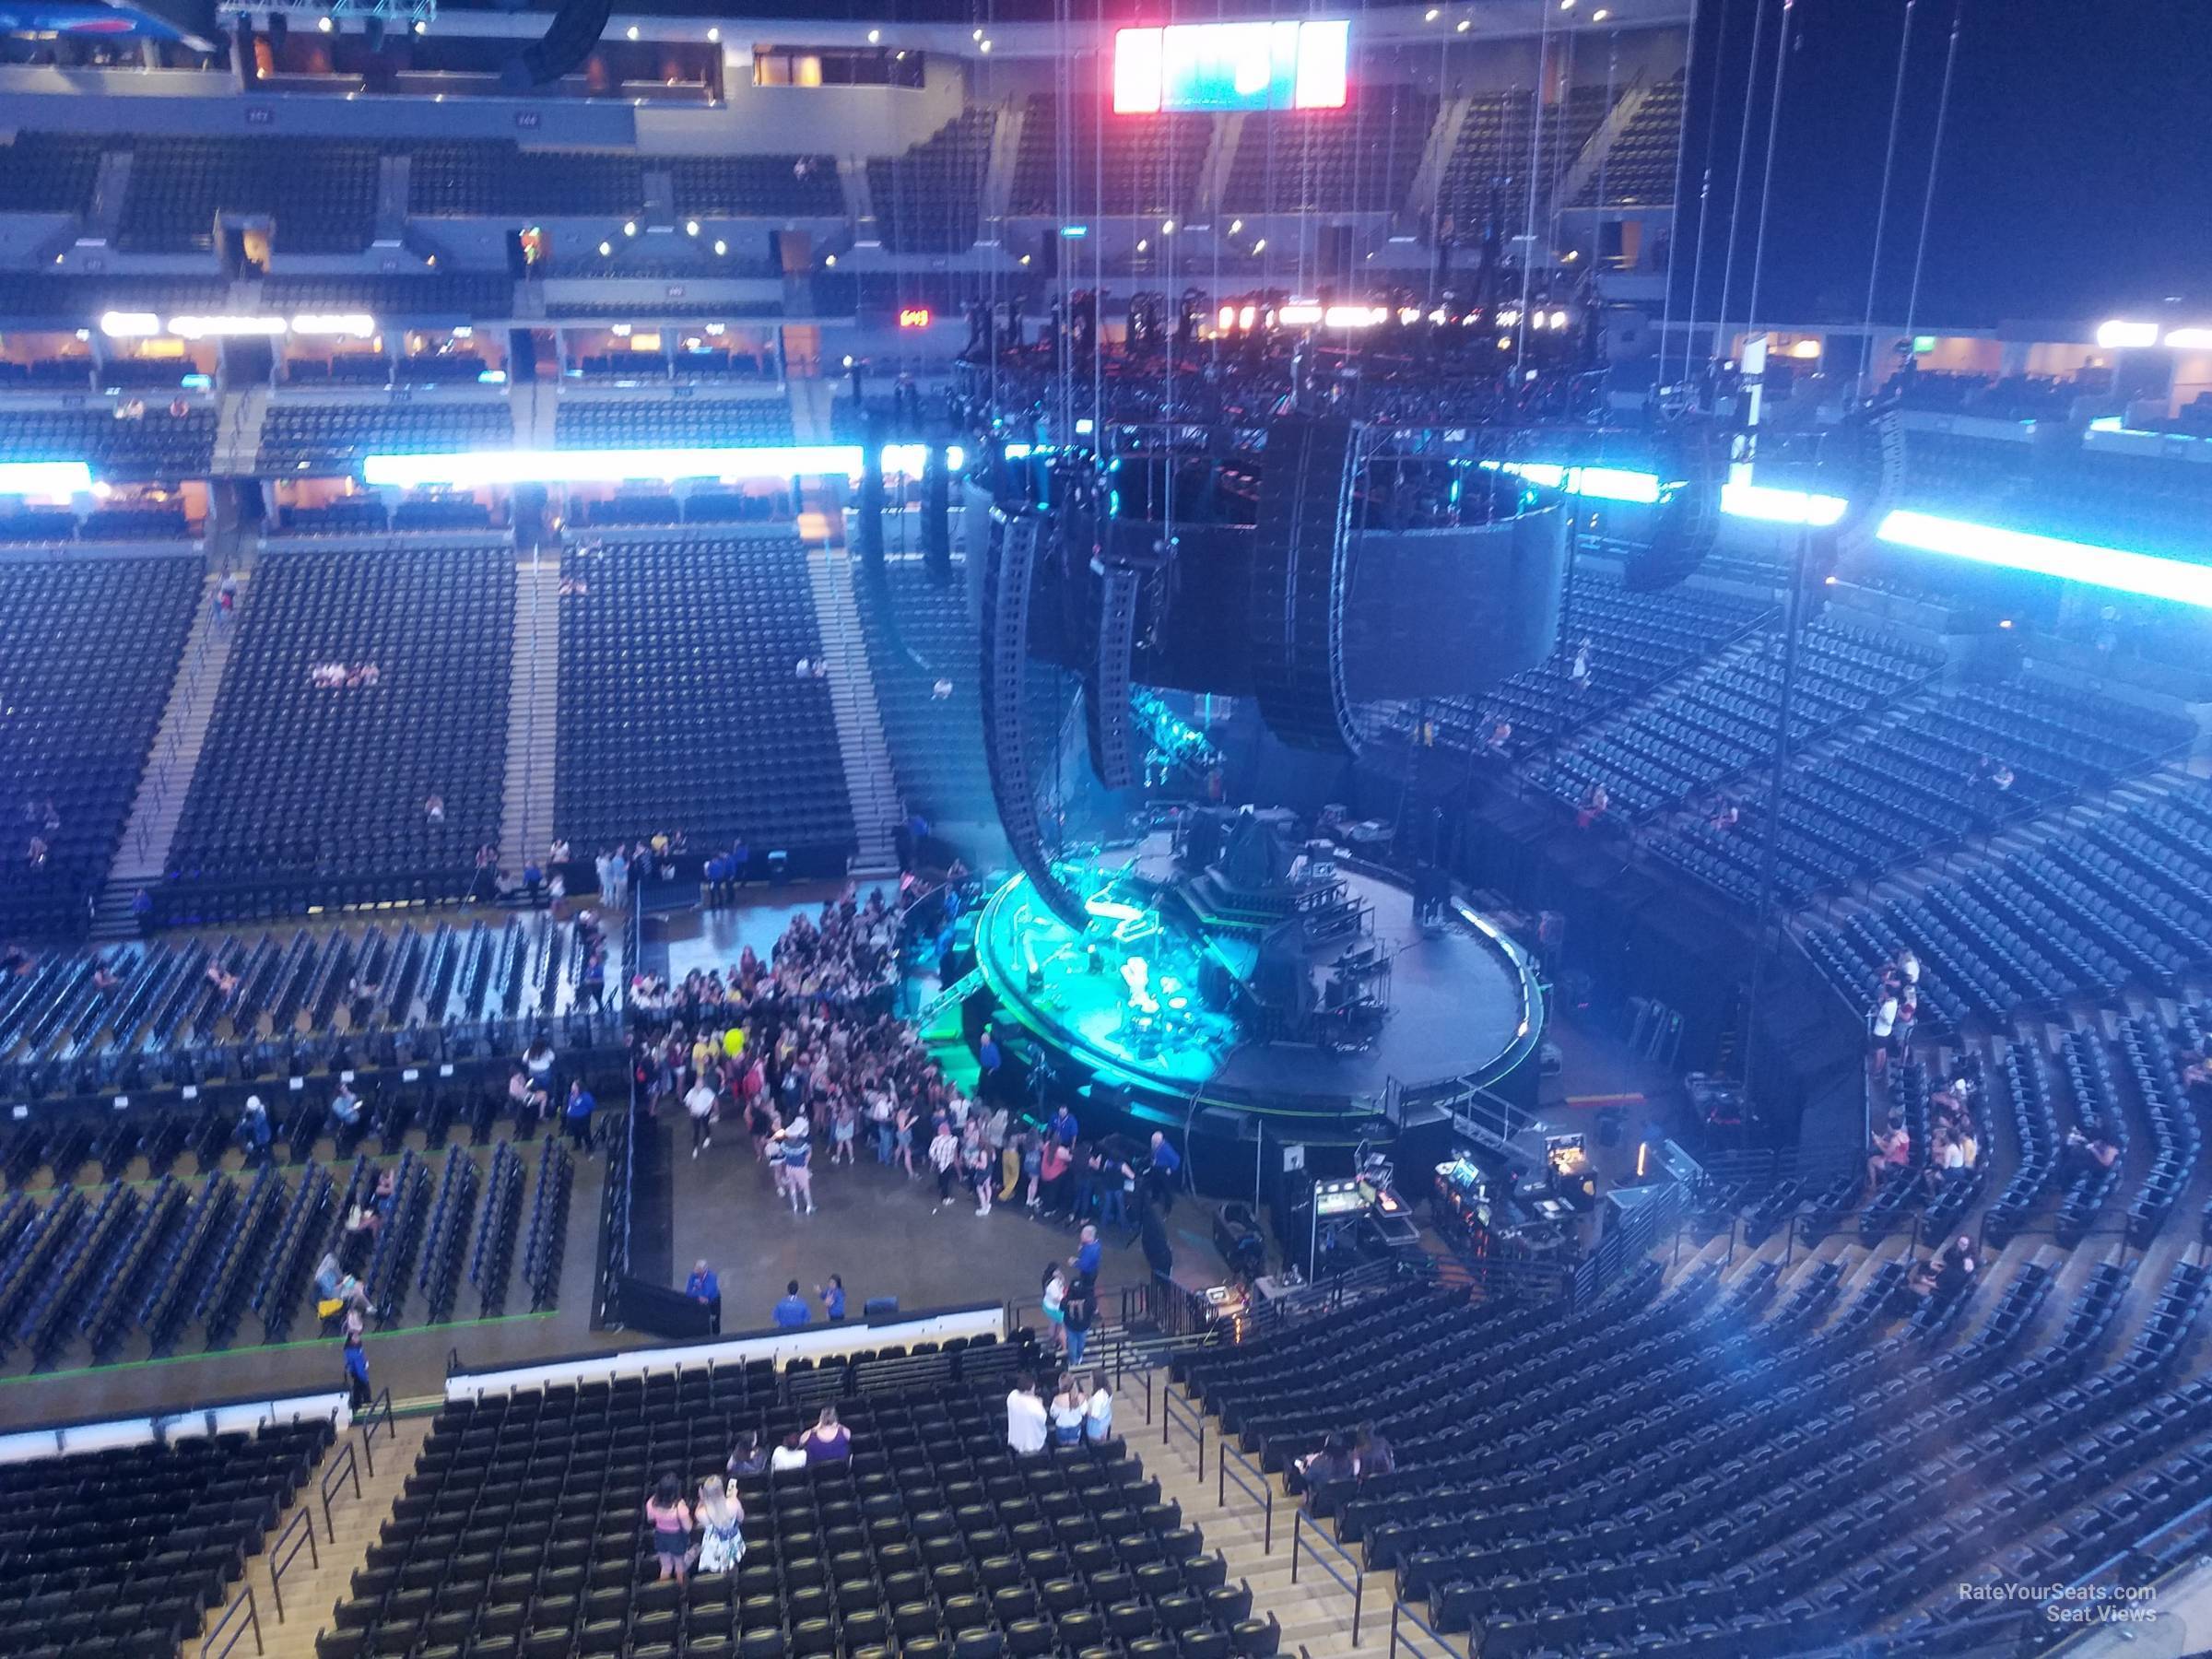 section 379, row 3 seat view  for concert - ball arena